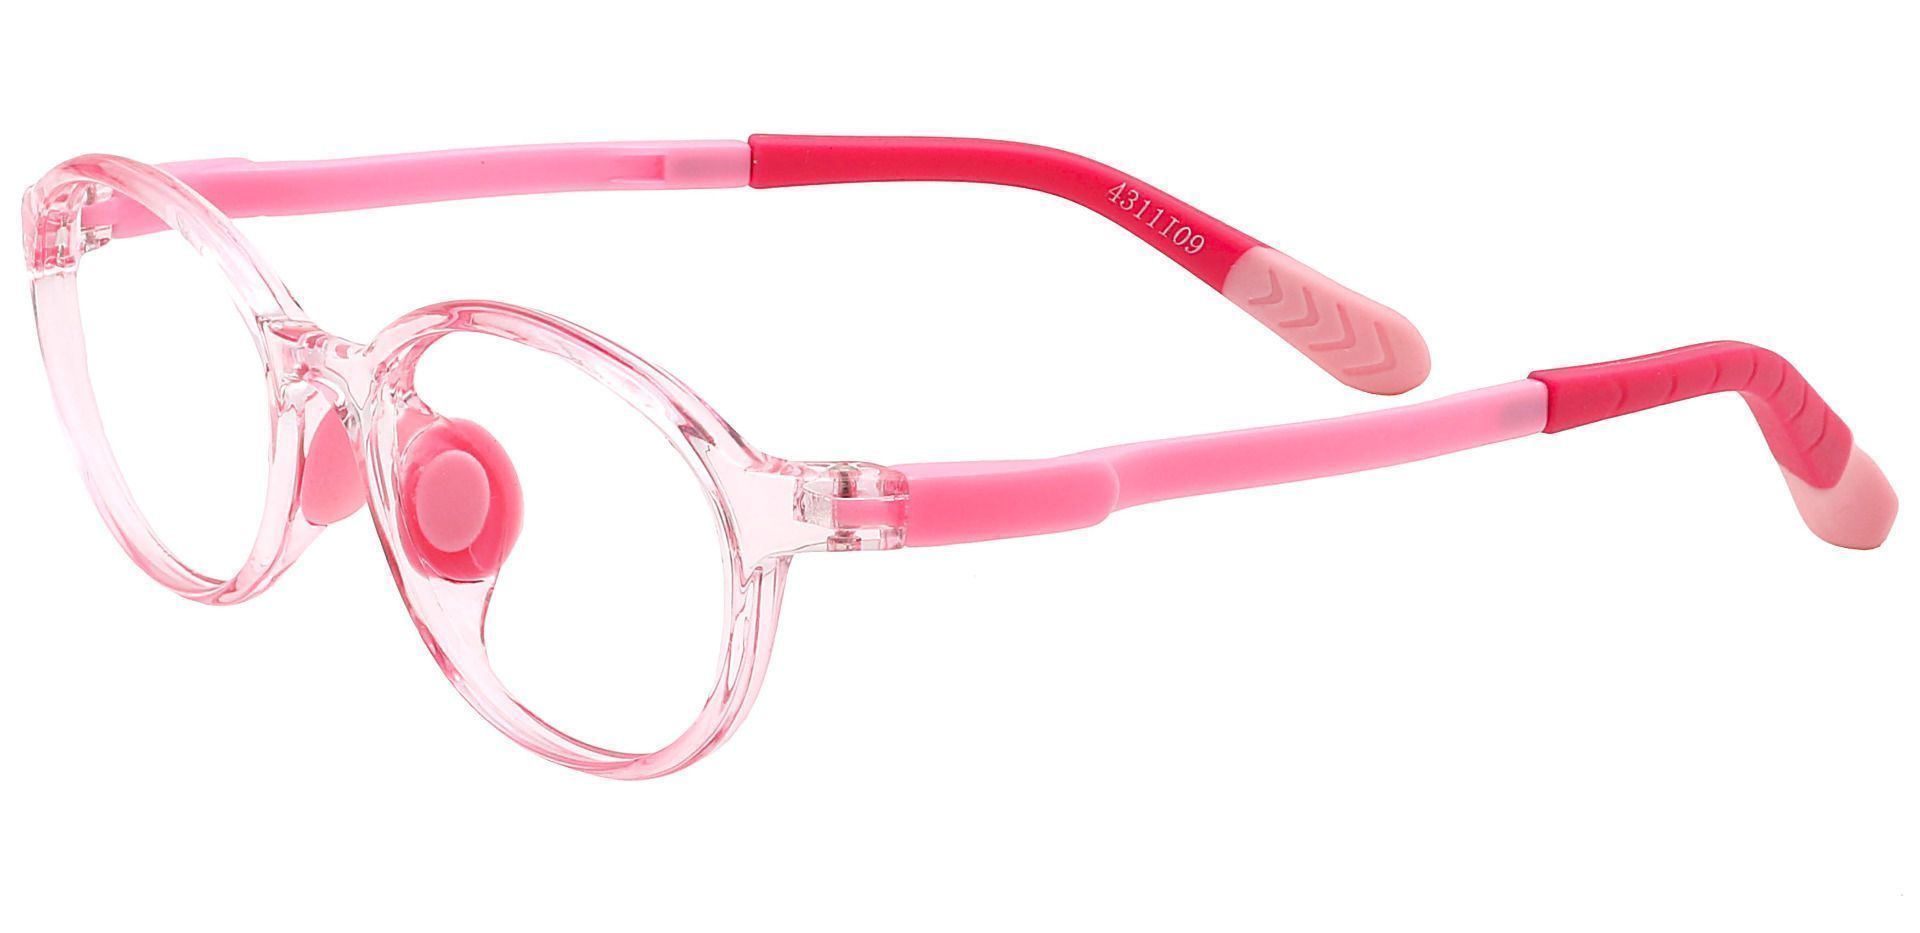 Axel Oval Blue Light Blocking Glasses - Bubble Gum Pink Crystal